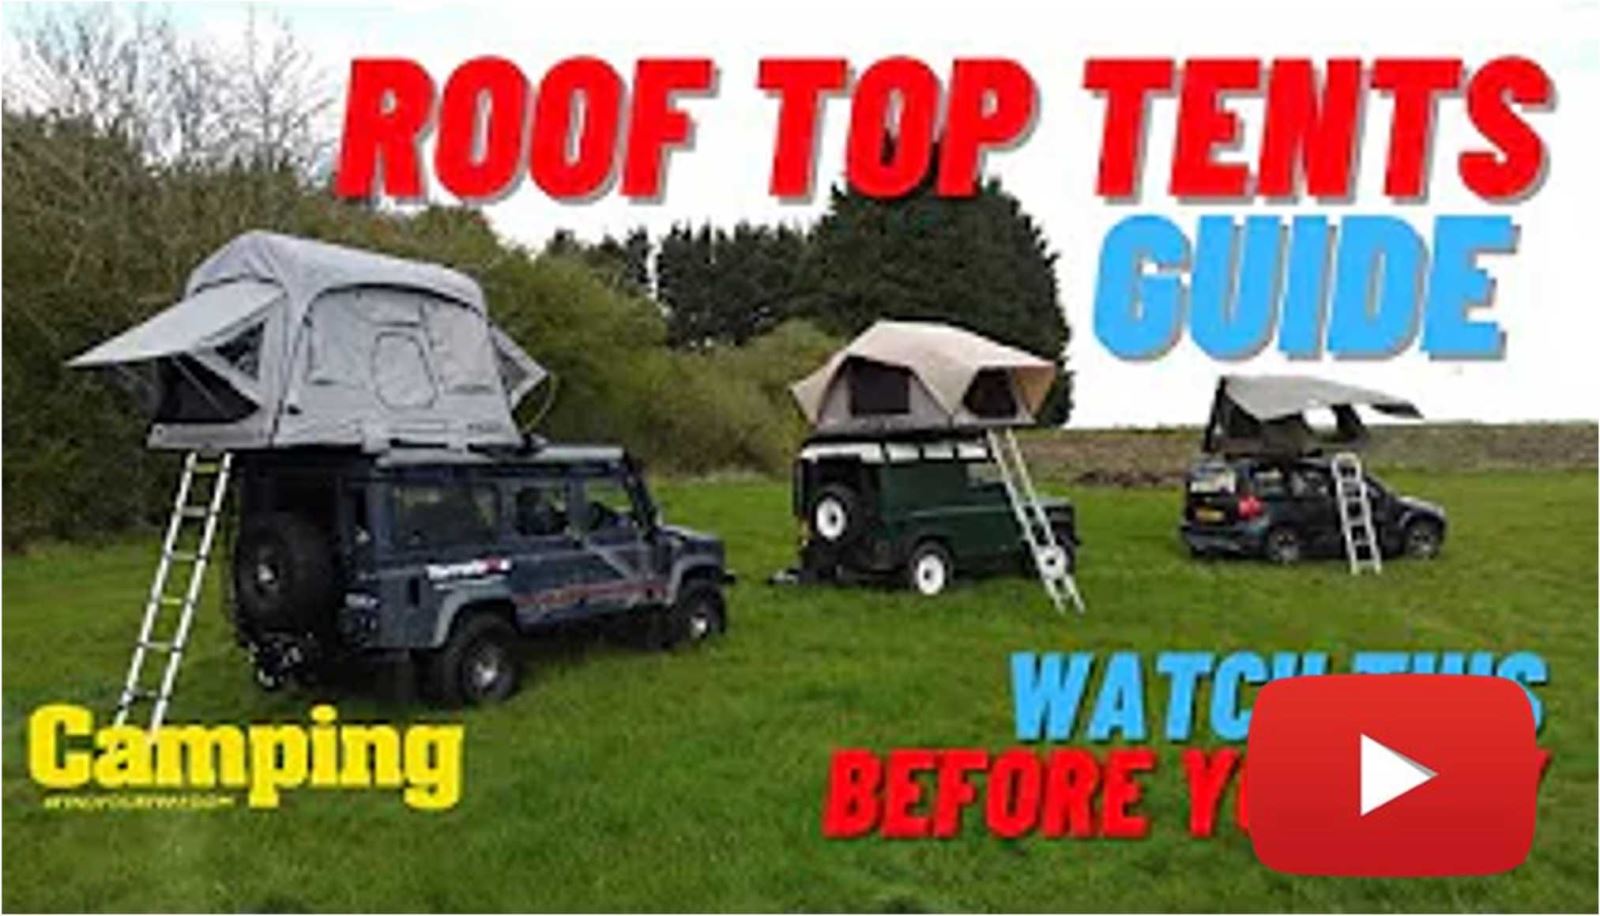 Looking to buy a roof top tent? Watch this first...